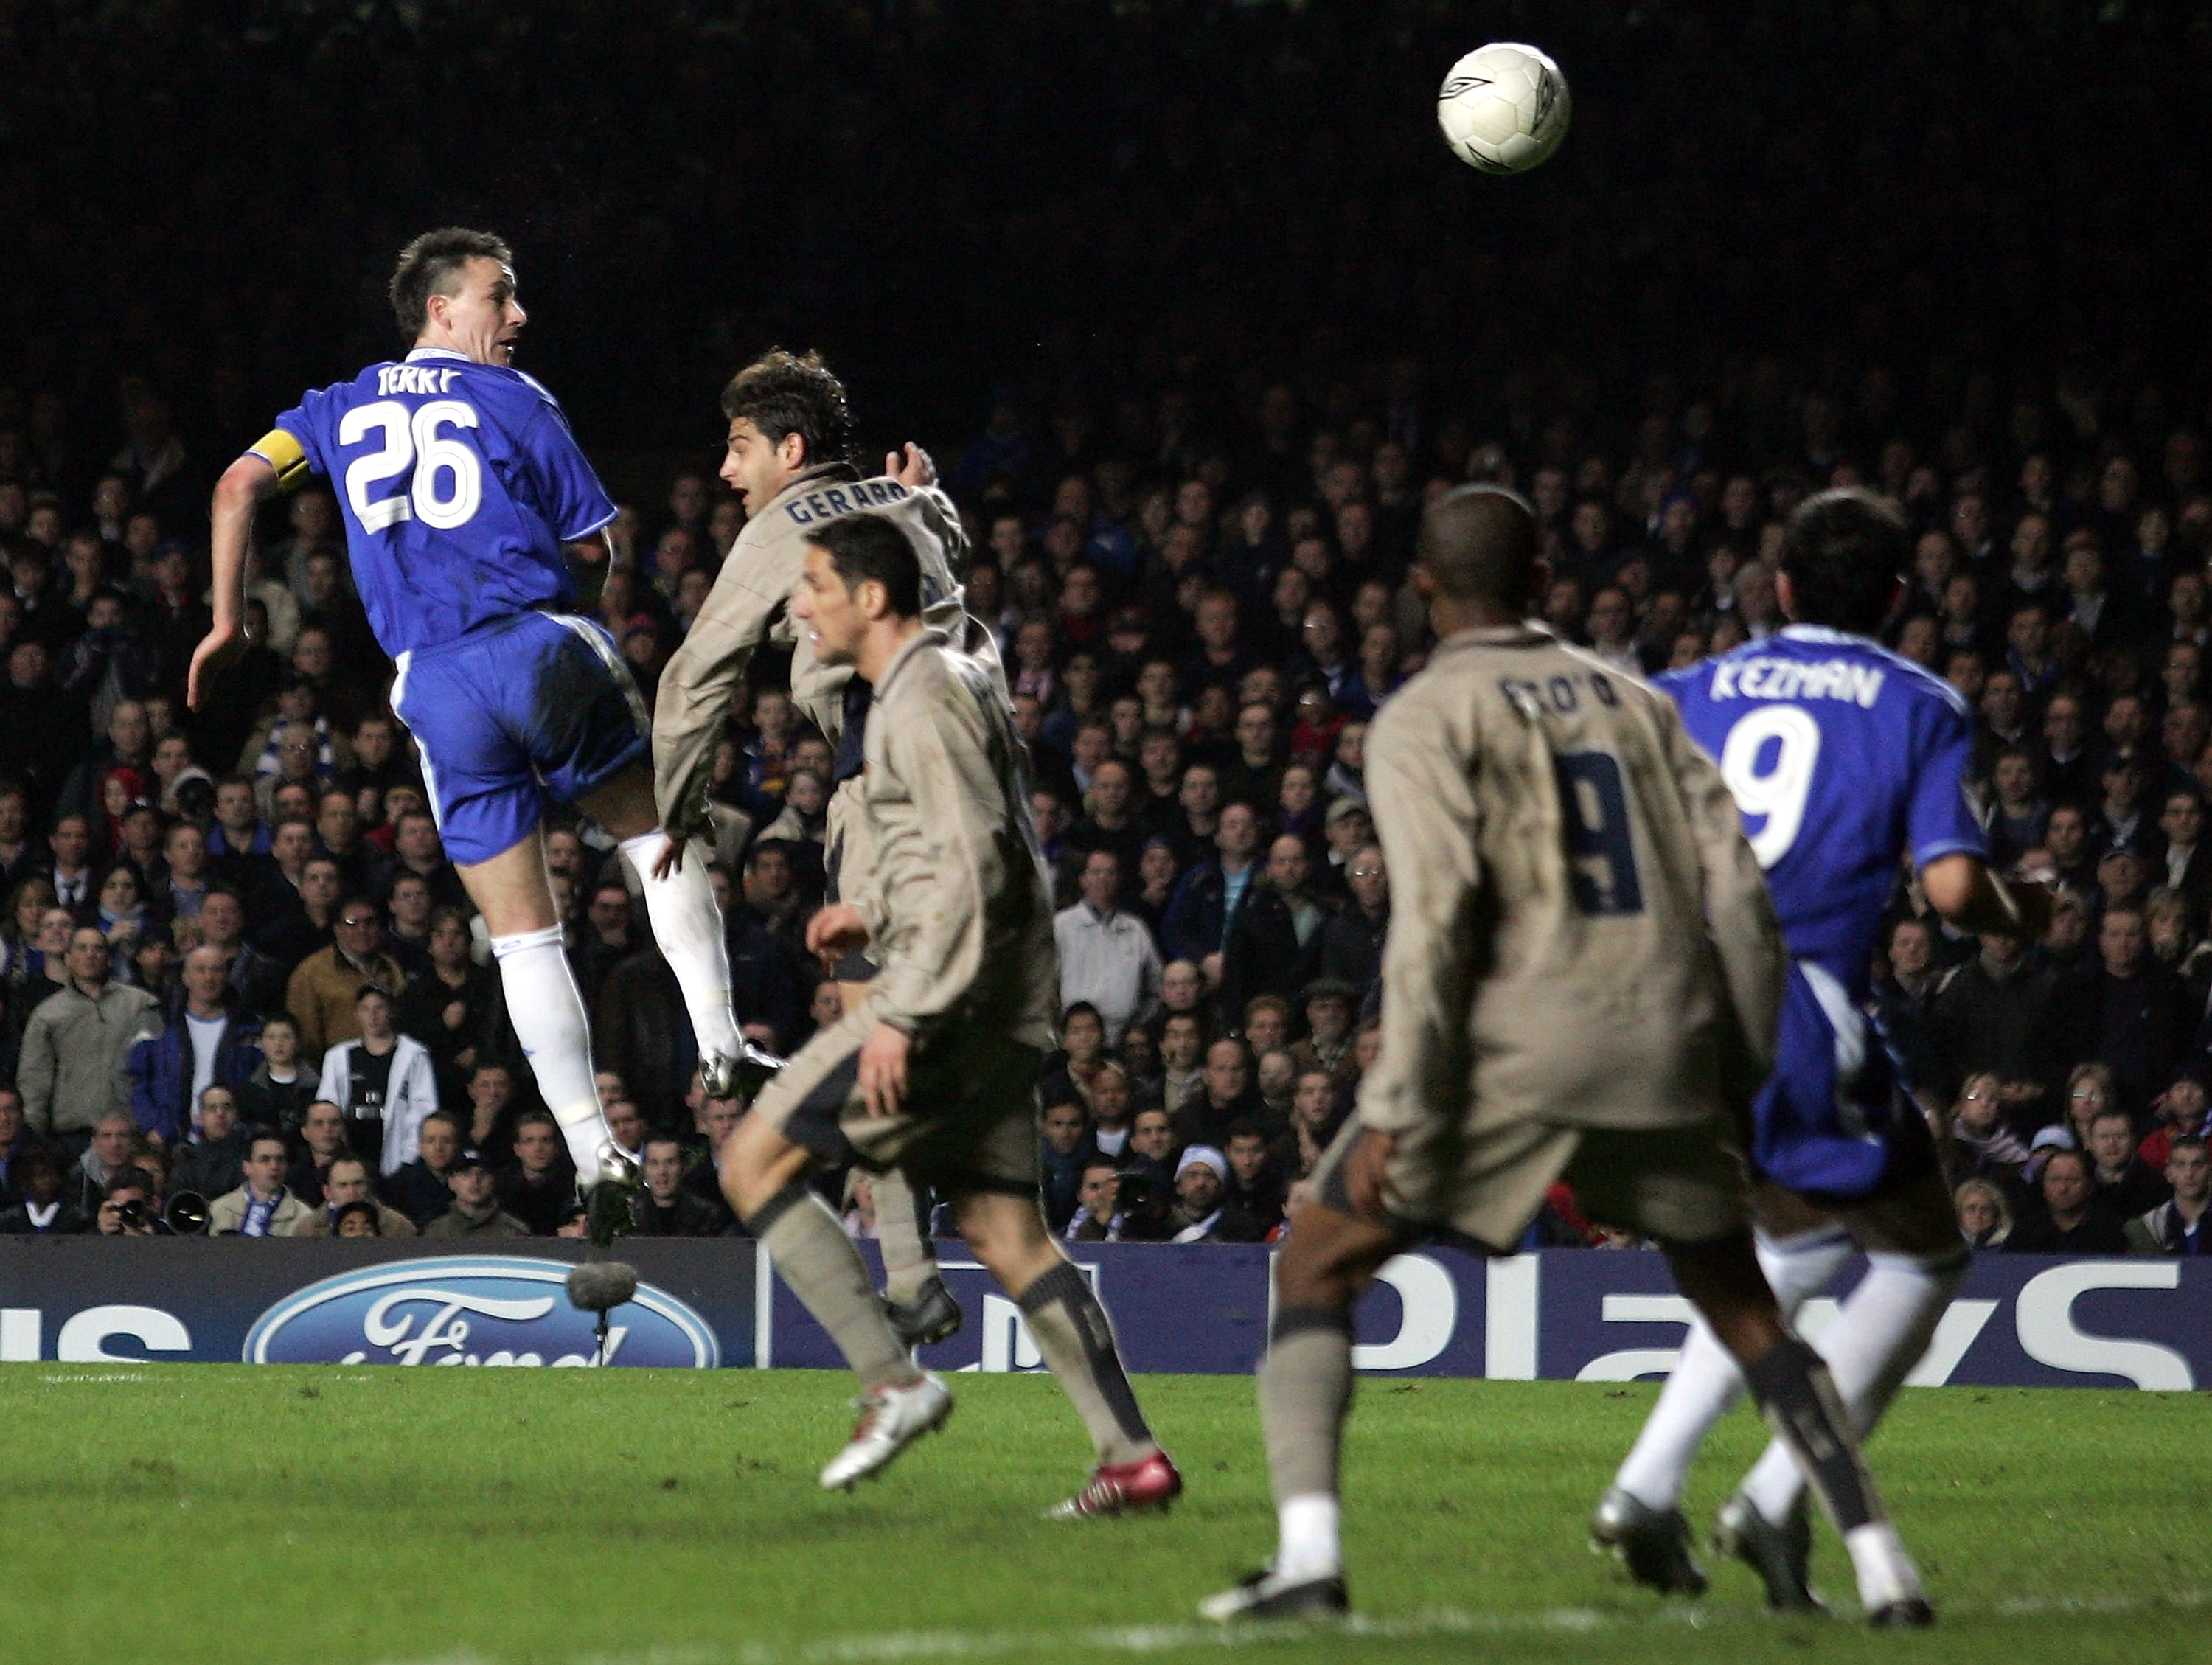 LONDON - MARCH 8: John Terry of Chelsea scores thier fourth goal during the UEFA Champions League, First Knockout Round, Second Leg match between Chelsea and Barcelona at Stamford Bridge on March 8, 2005 in London, England.  (Photo by Shaun Botterill/Gett